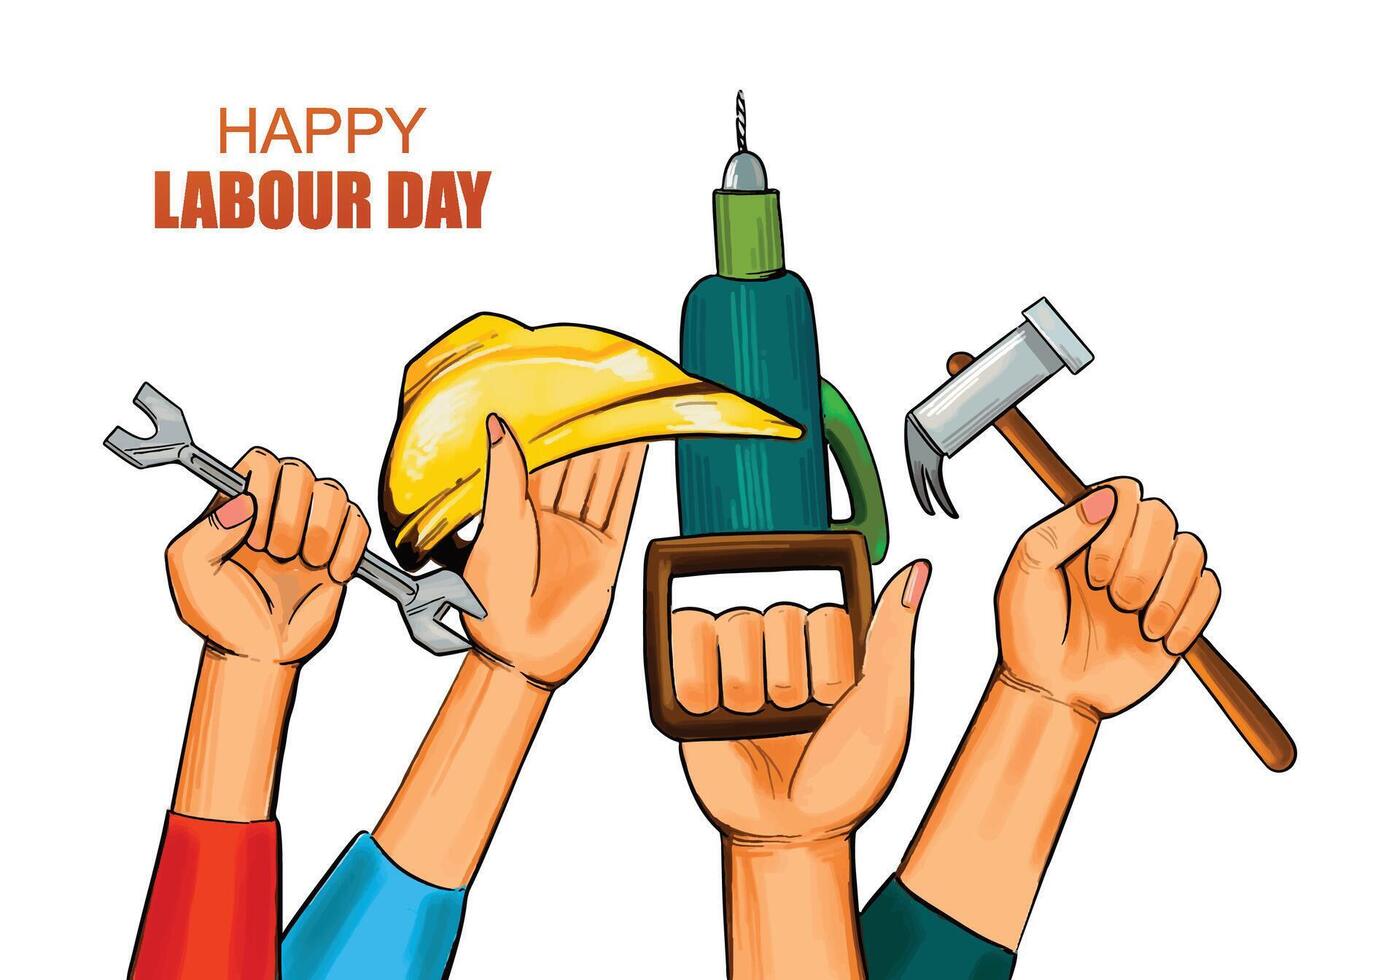 Happy labour day poster card design vector